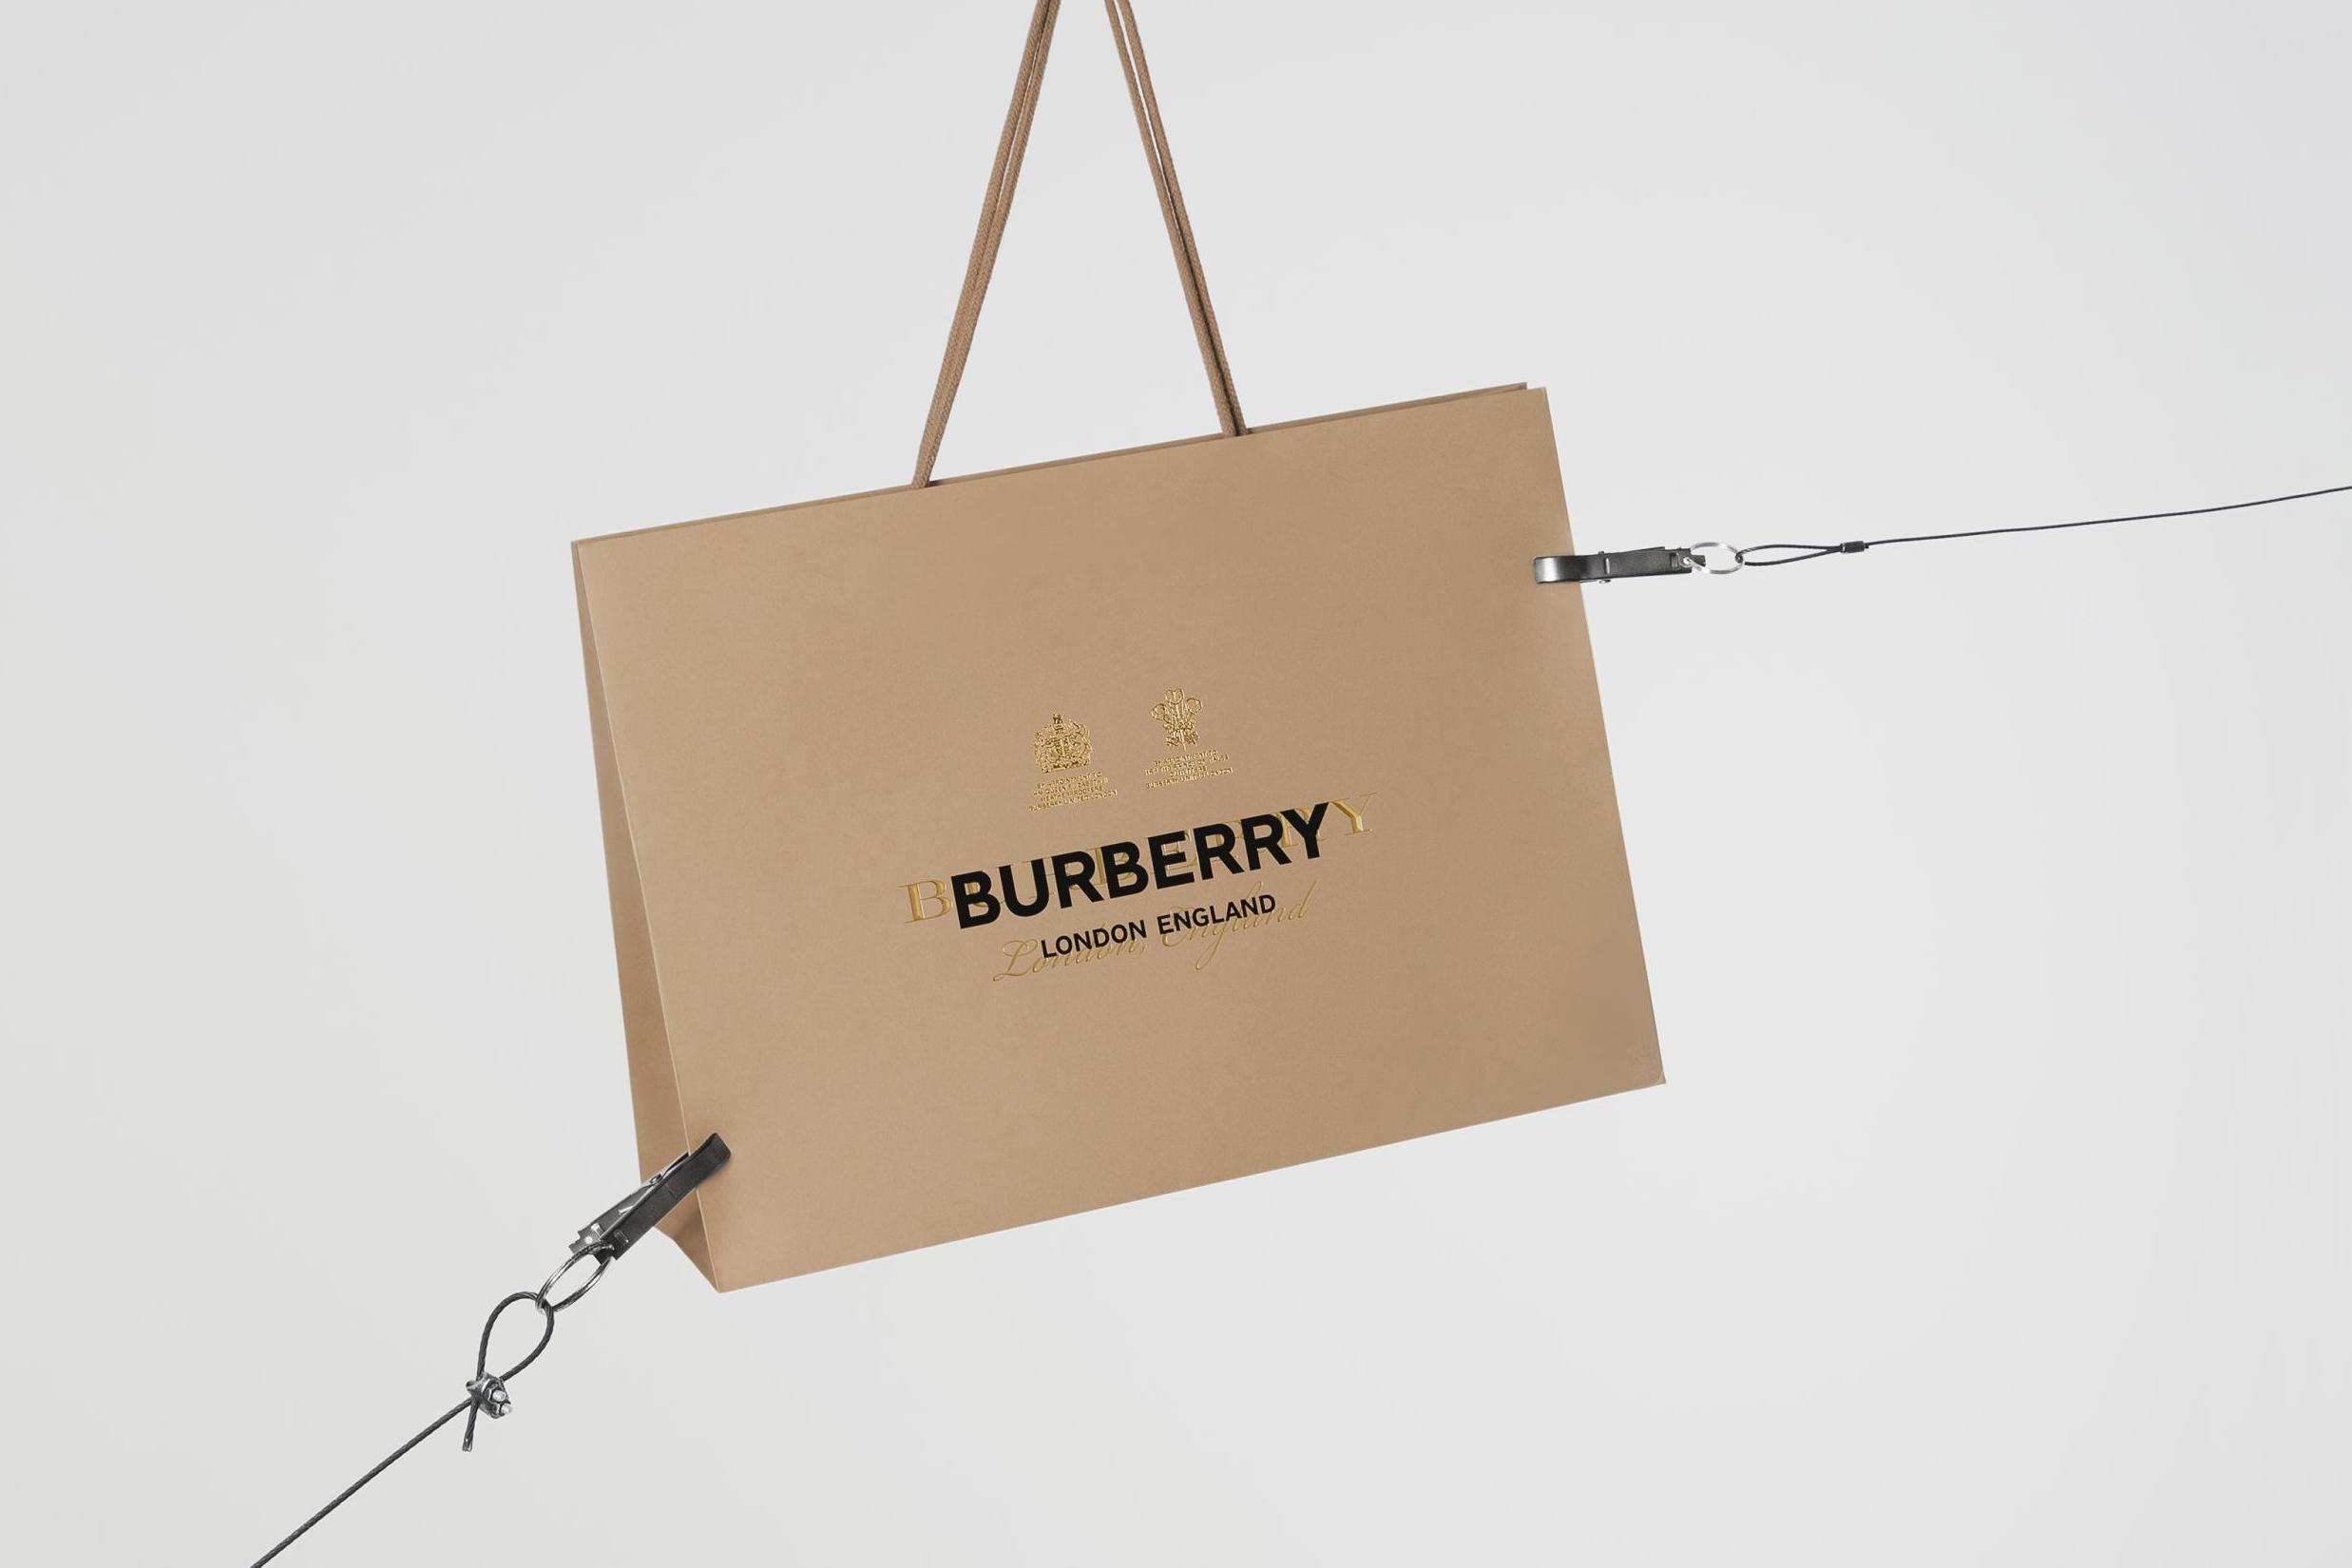 burberry sold